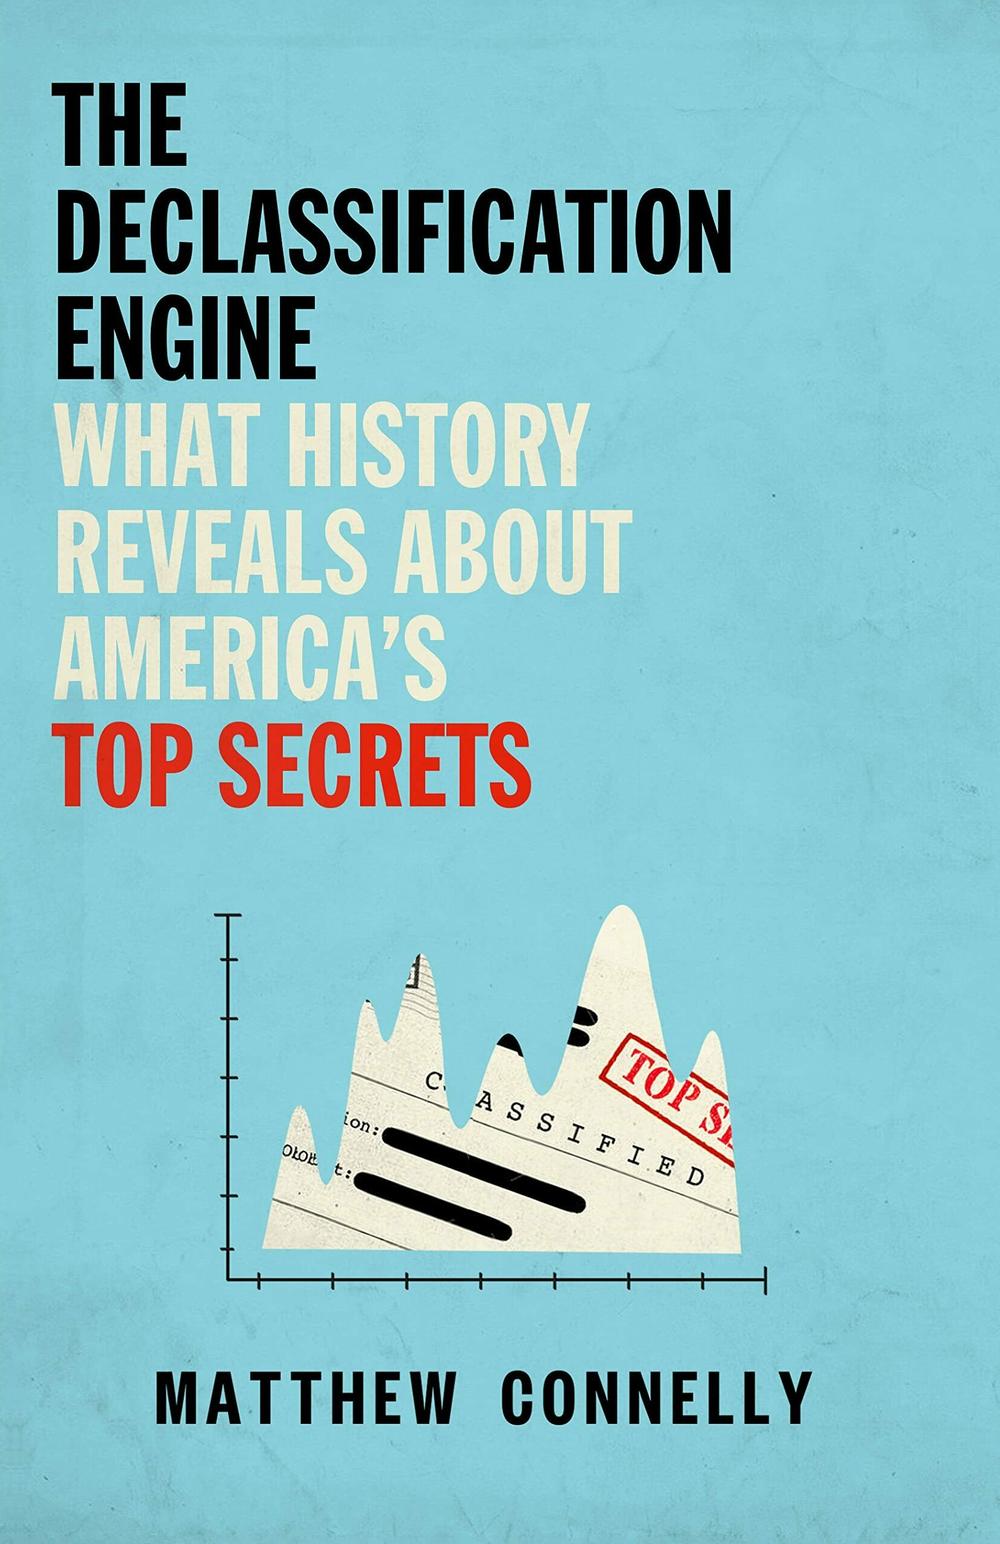 <em>The Declassification Engine: What History Reveals About America's Top Secrets</em>, by Michael Connelly